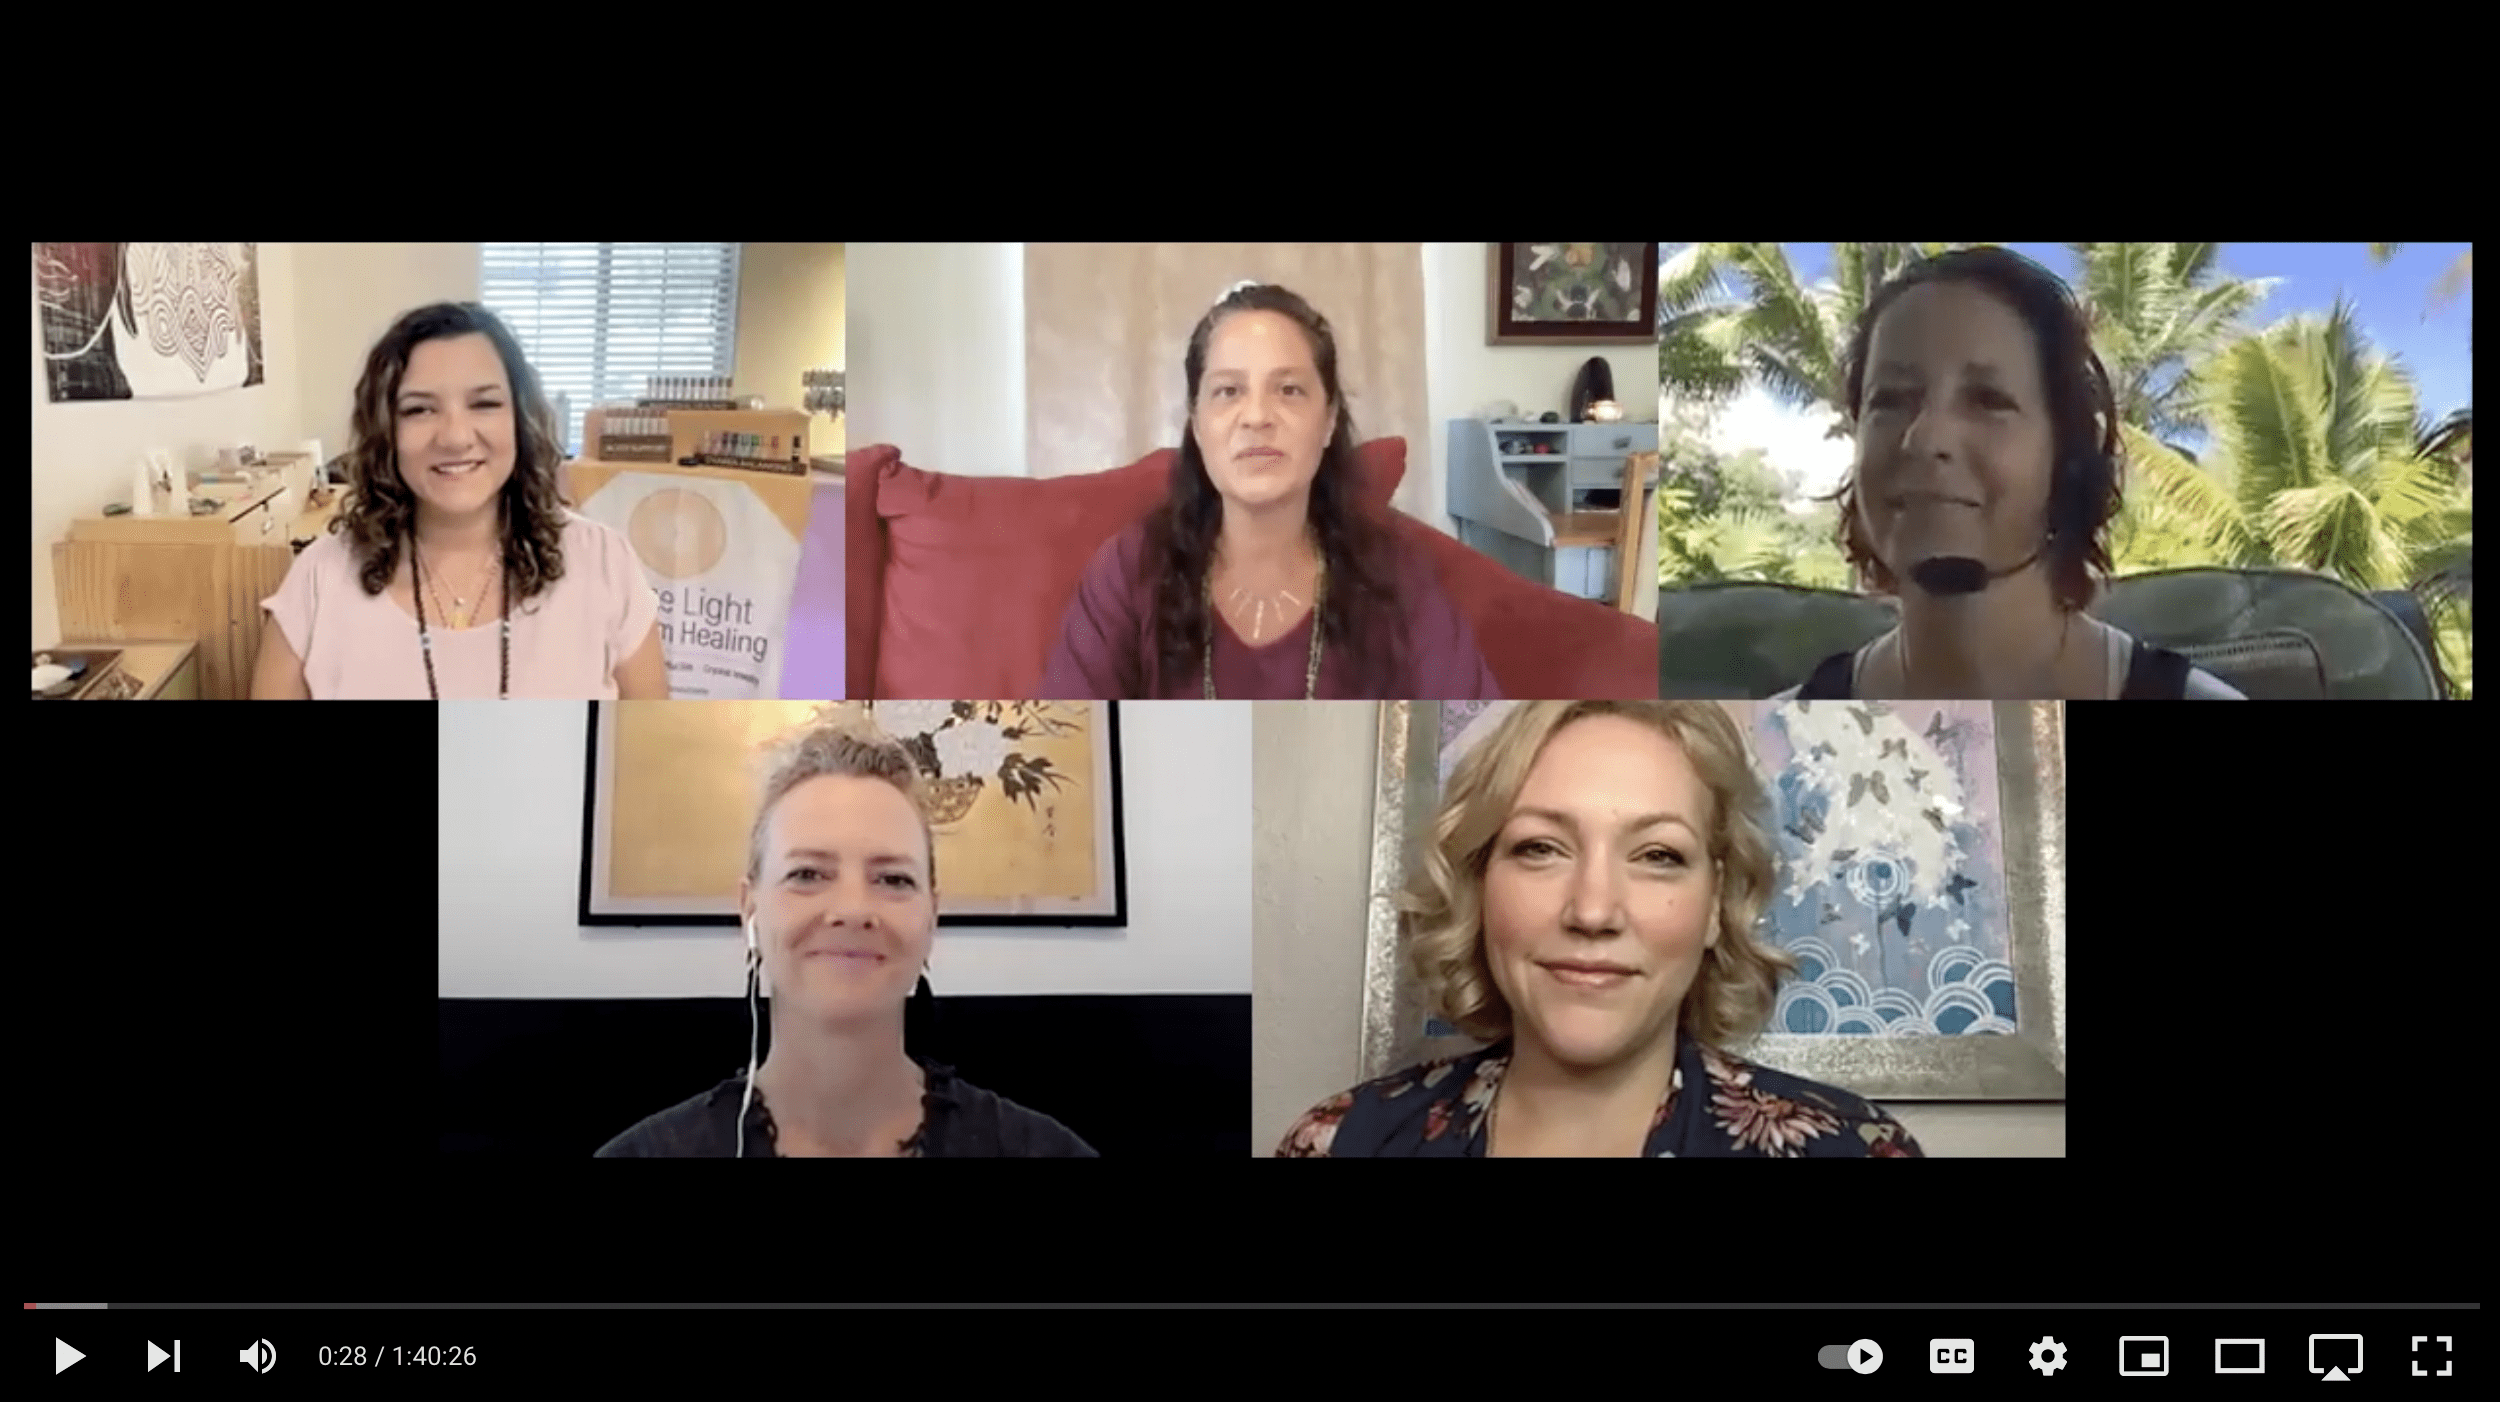 Where are We Headed as a Planet? Maria Hosts a Panel of Wise Women Exploring the Ascension Timeline